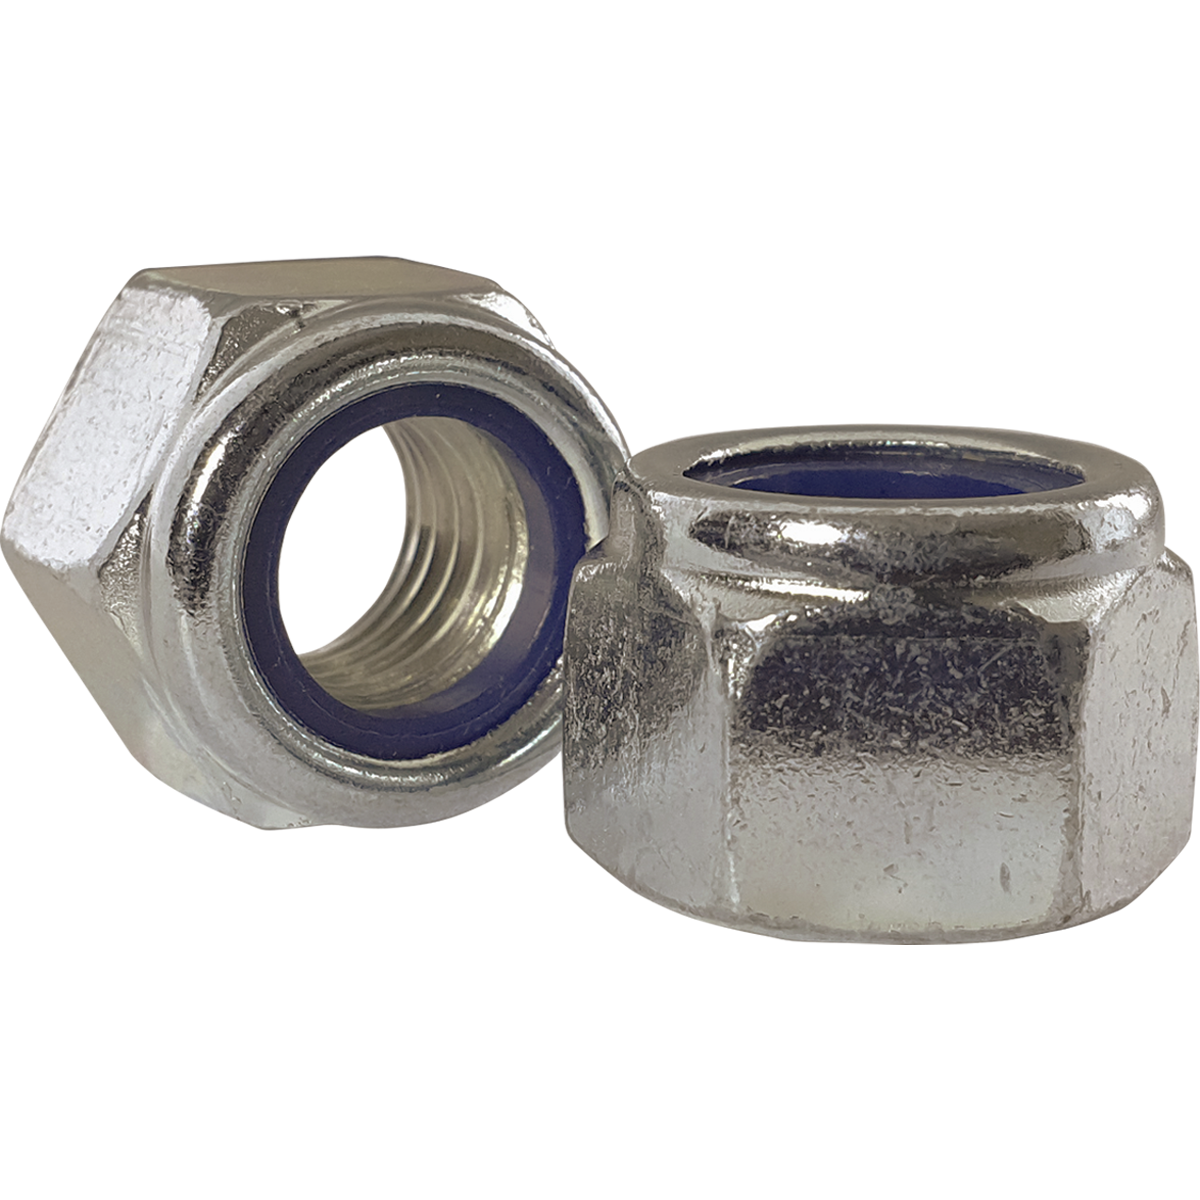 Corrosion resistant A2 stainless steel, high type, nylon insert nuts, also known as nyloc nuts, or nylon insert nuts. Competitive prices and bulk discounts available with Fusion Fixings